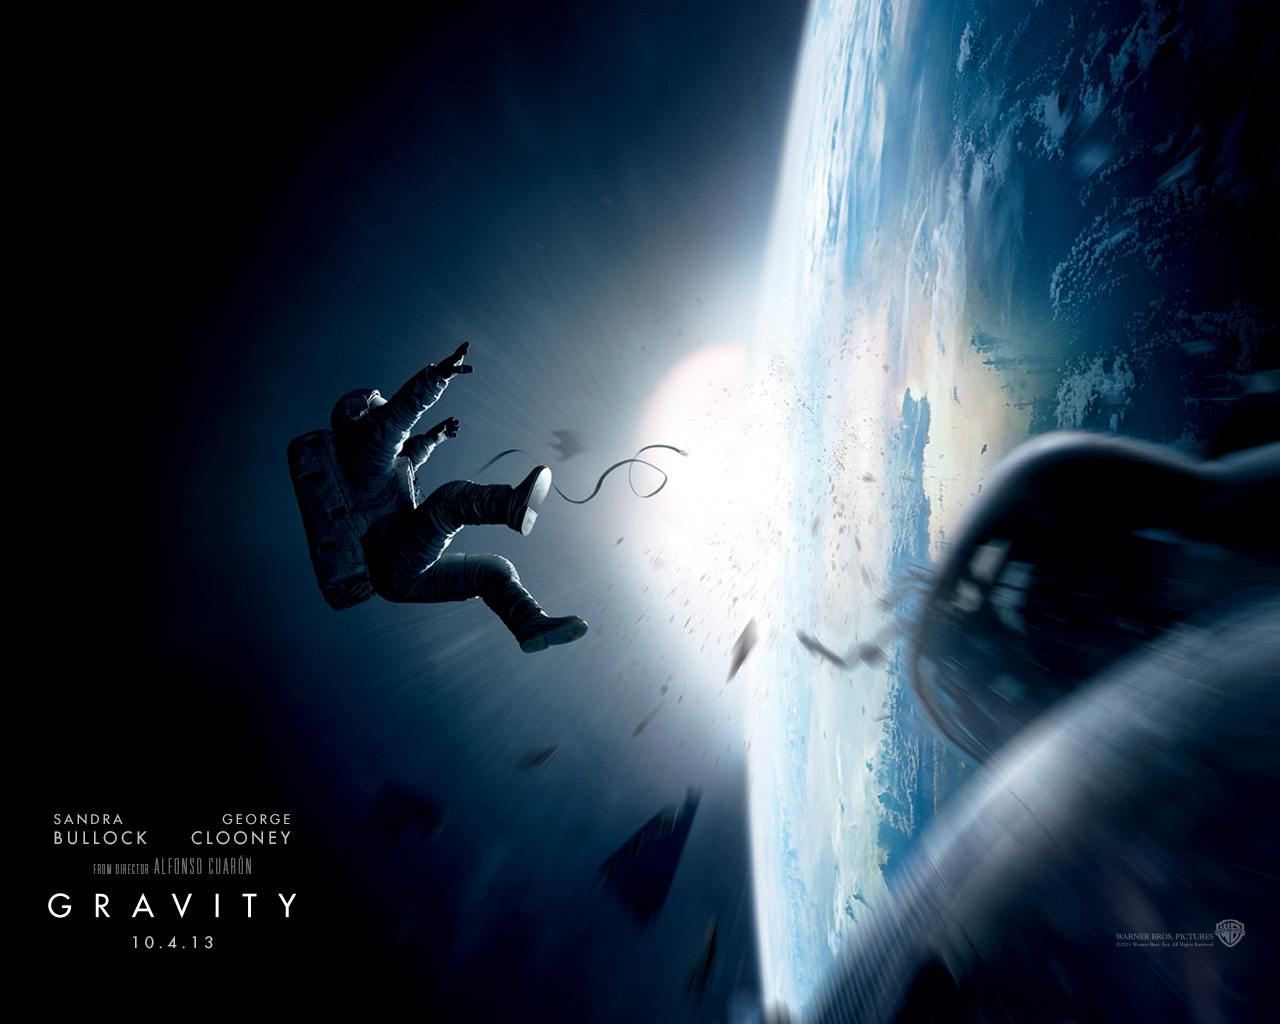 A Film About Human’s Will Of Never Giving Up: Gravity